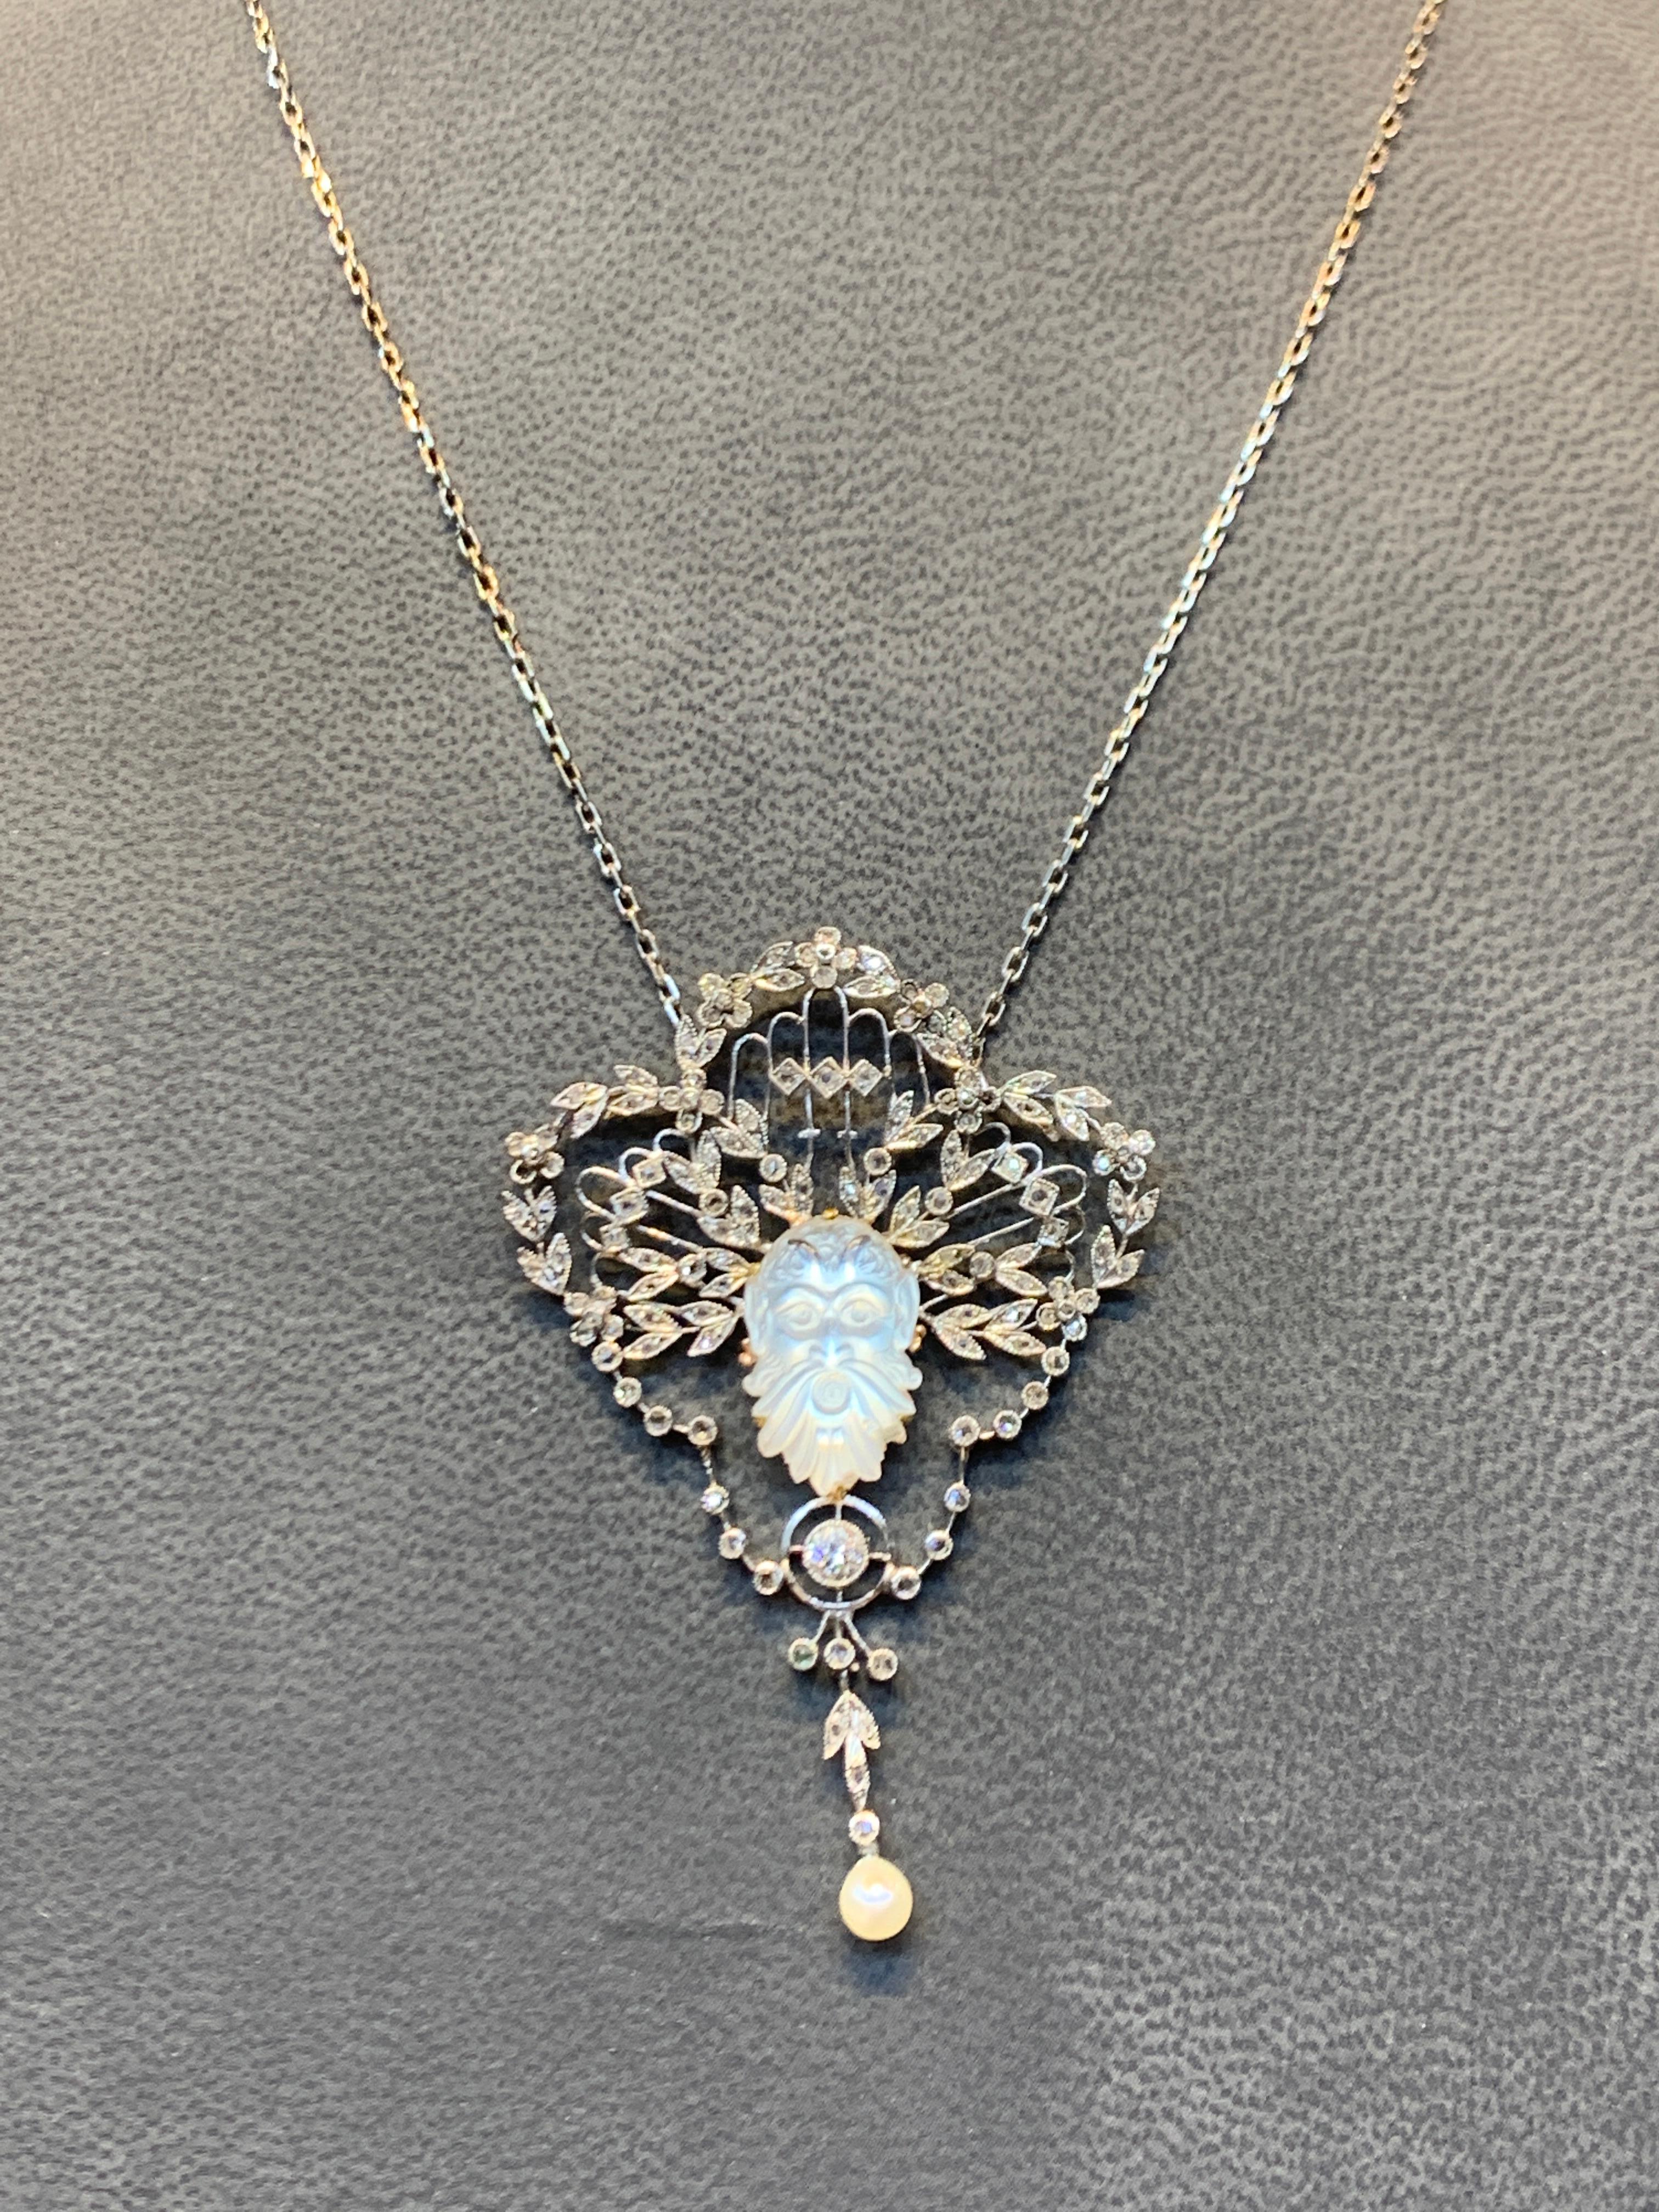 Carved Moon Stone Diamond Pendant Necklace In Excellent Condition For Sale In New York, NY